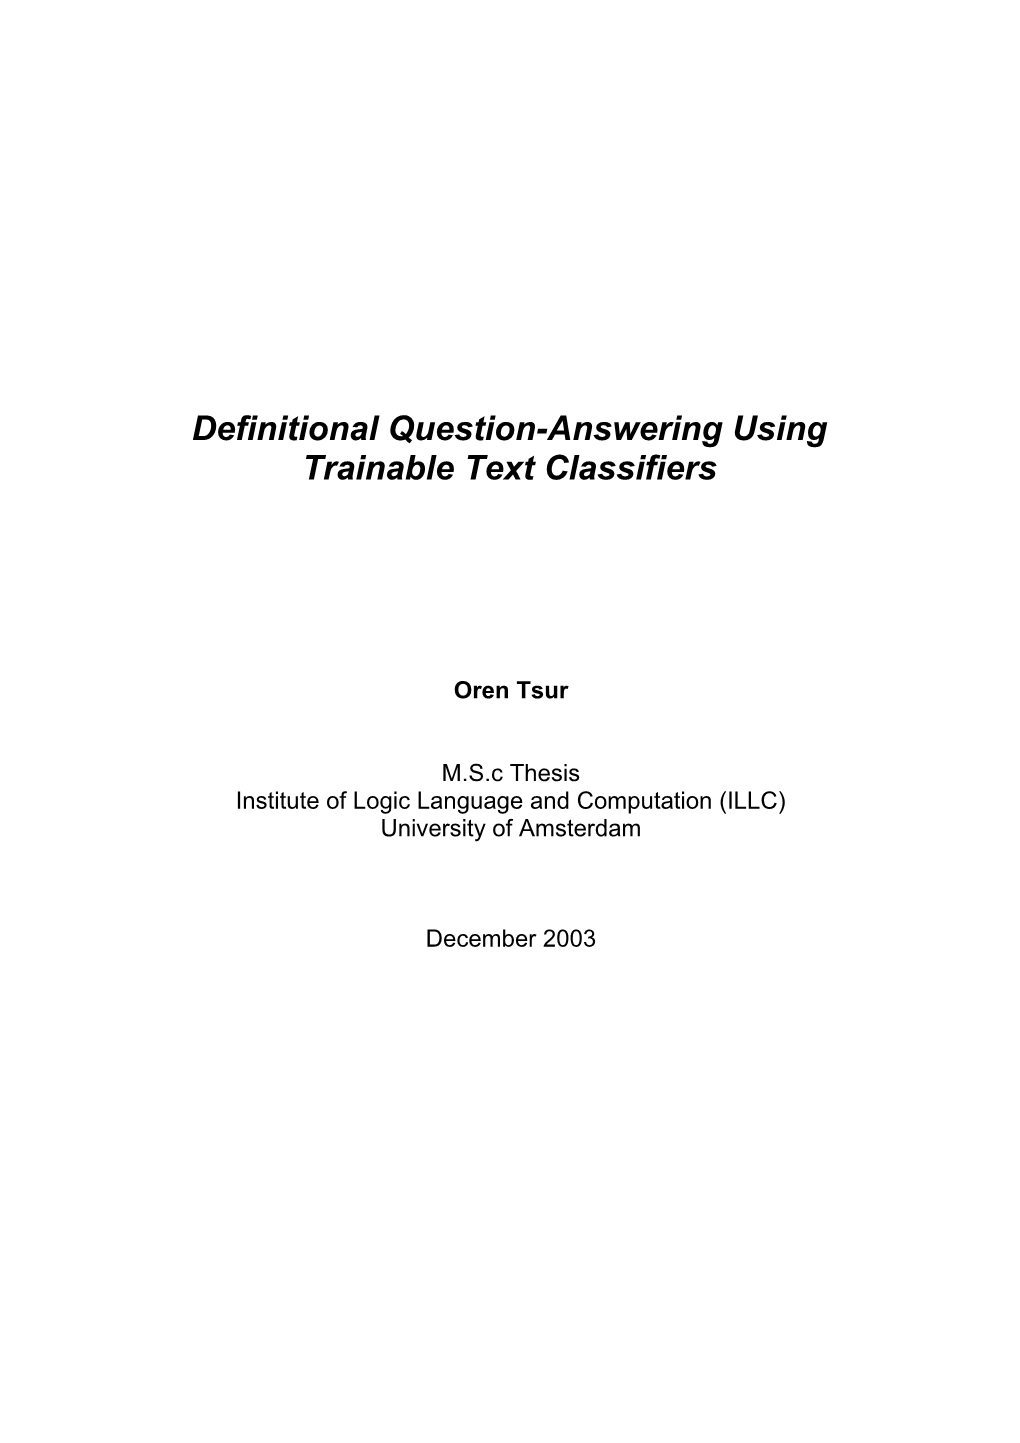 Definitional Question-Answering Using Trainable Text Classifiers